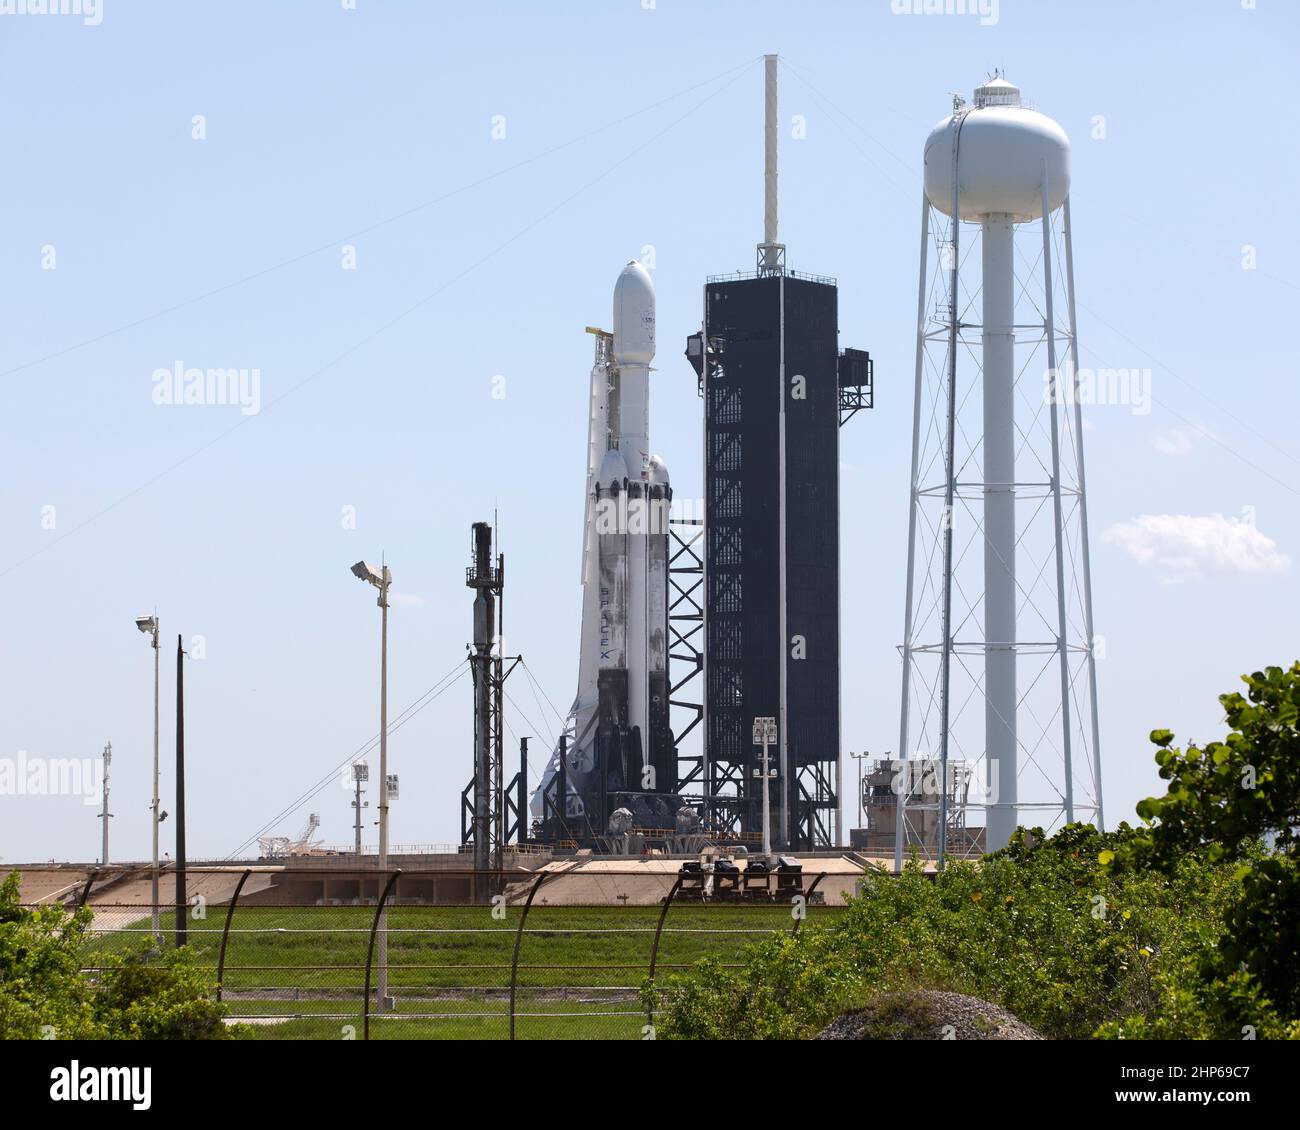 A SpaceX Falcon Heavy rocket is ready for launch on the pad at Launch Complex 39A at NASA’s Kennedy Space Center in Florida on June 24, 2019. SpaceX and the U.S. Department of Defense will launch two dozen satellites to space, including four NASA payloads that are part of the Space Test Program-2, managed by the U.S. Air Force Space and Missile Systems Center Stock Photo